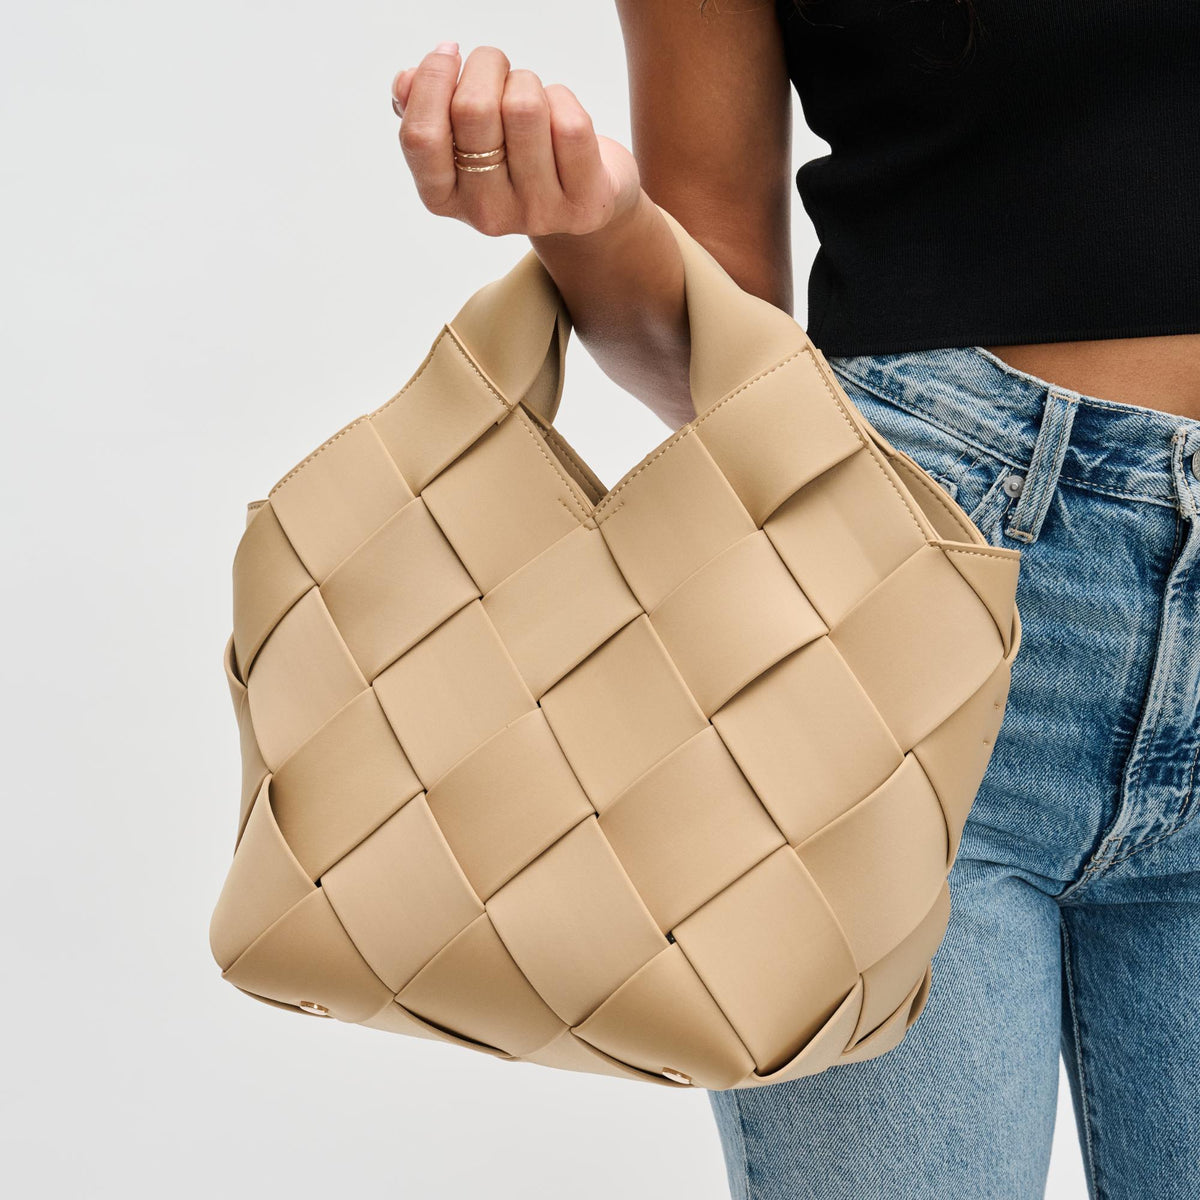 Woman wearing Nude Sol and Selene Resilience - Woven Neoprene Tote 841764108607 View 4 | Nude